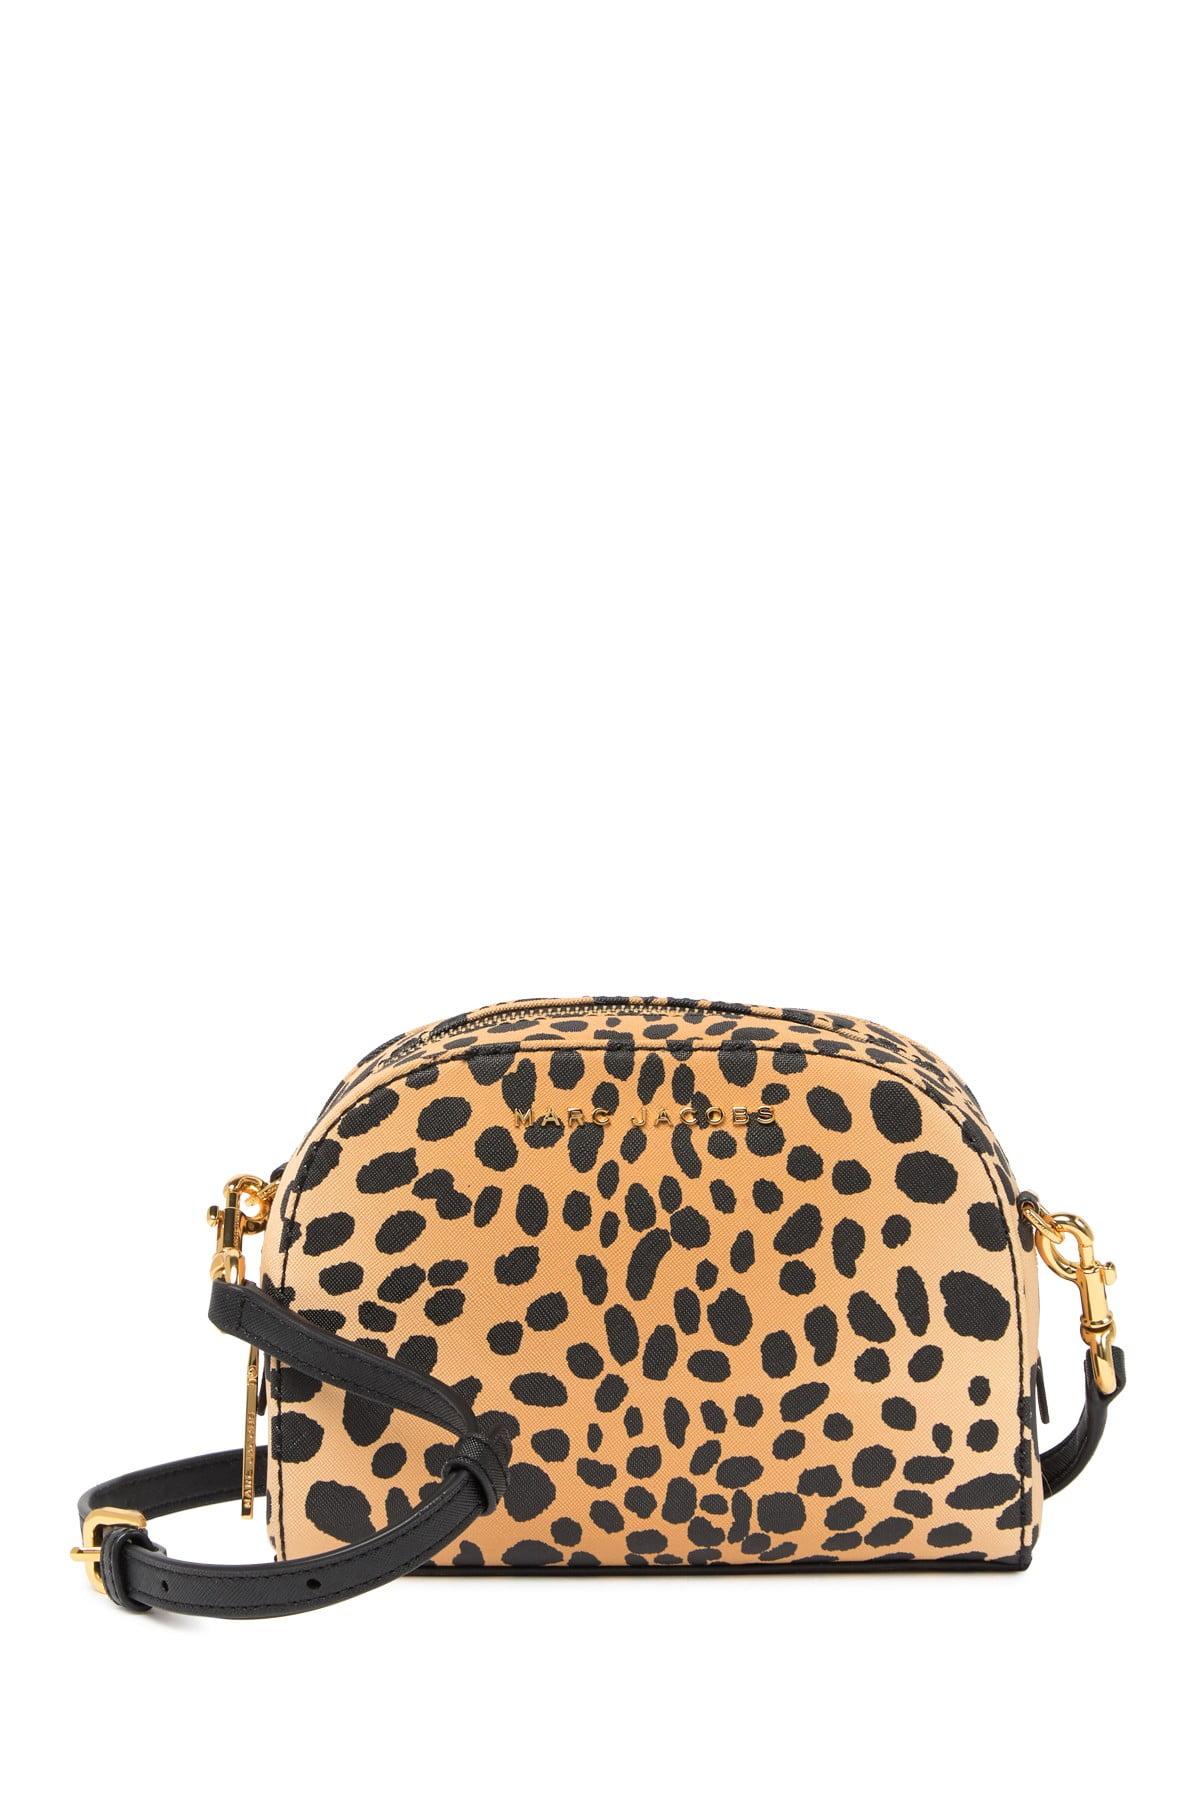 Marc Jacobs Playback Leather Crossbody